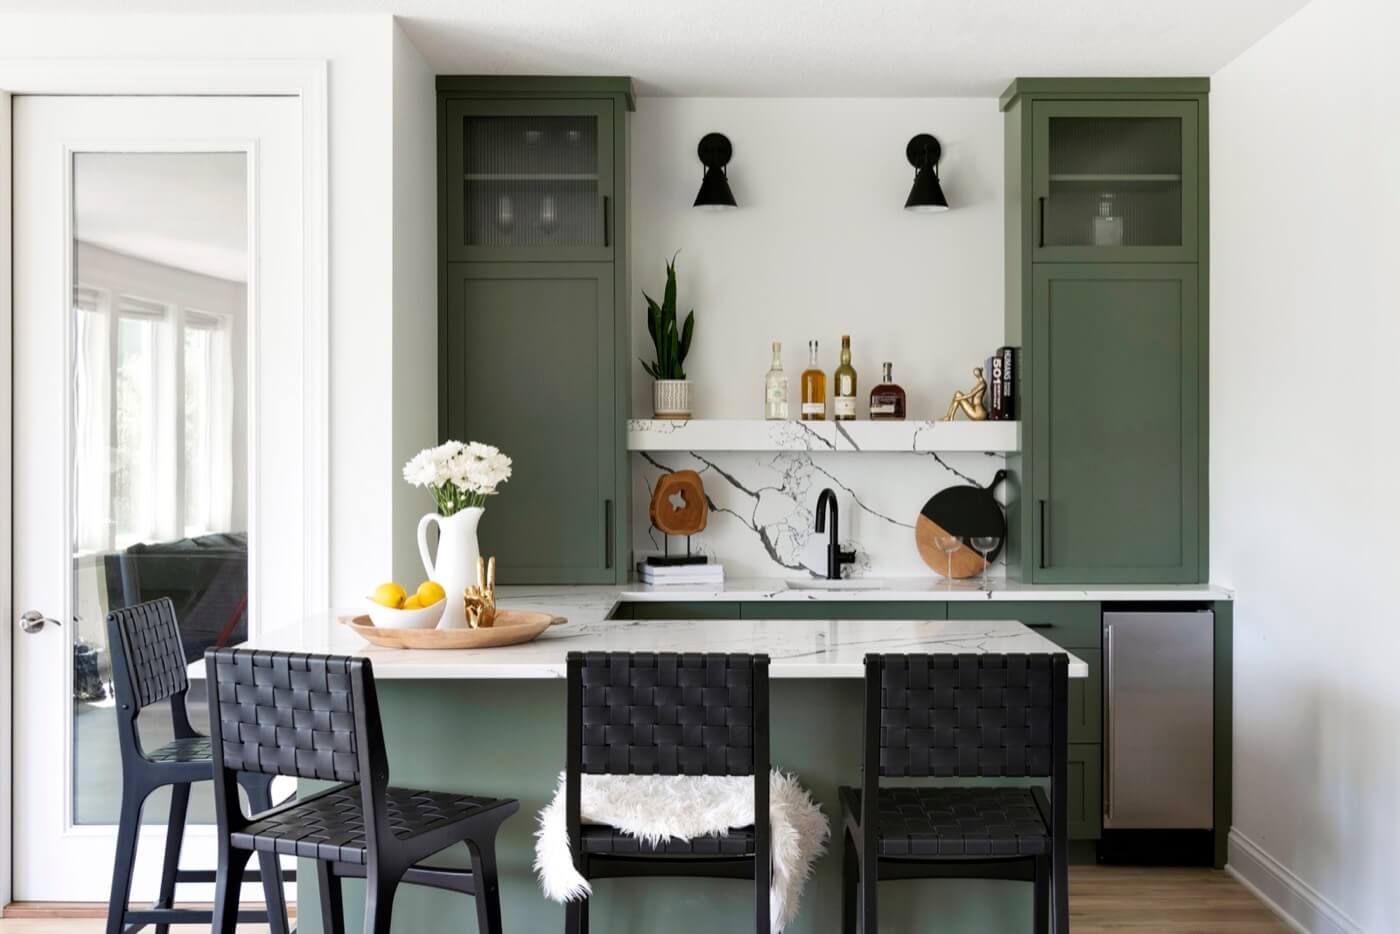 A dining area with contrasting green and white